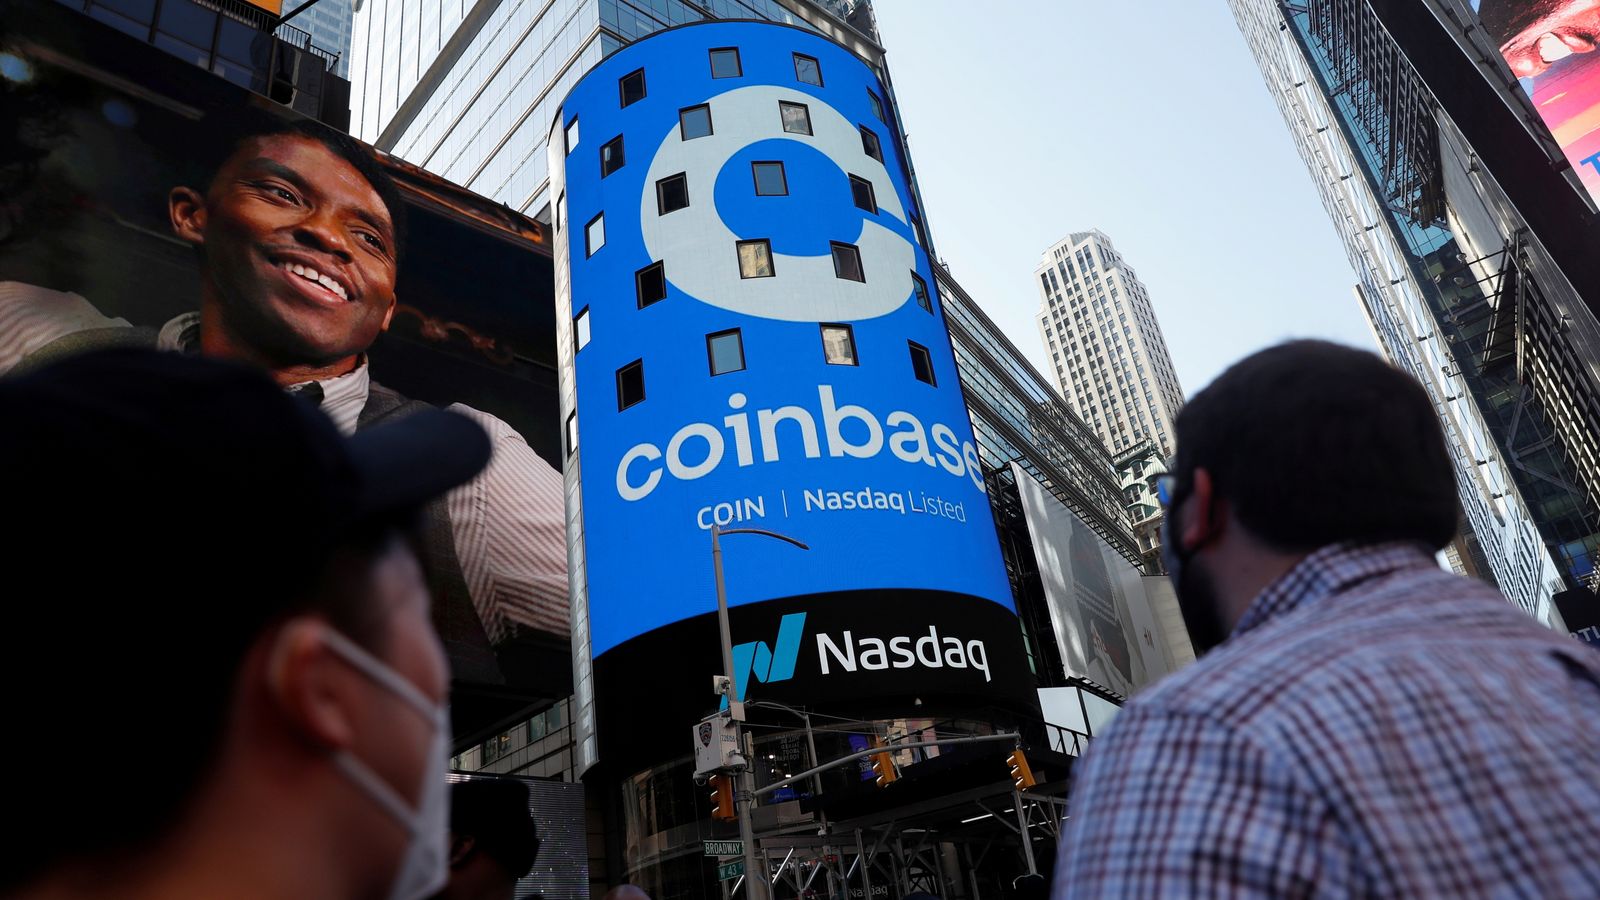 Coinbase Faces Legal Action from SEC for Operating Without Regulatory Approval